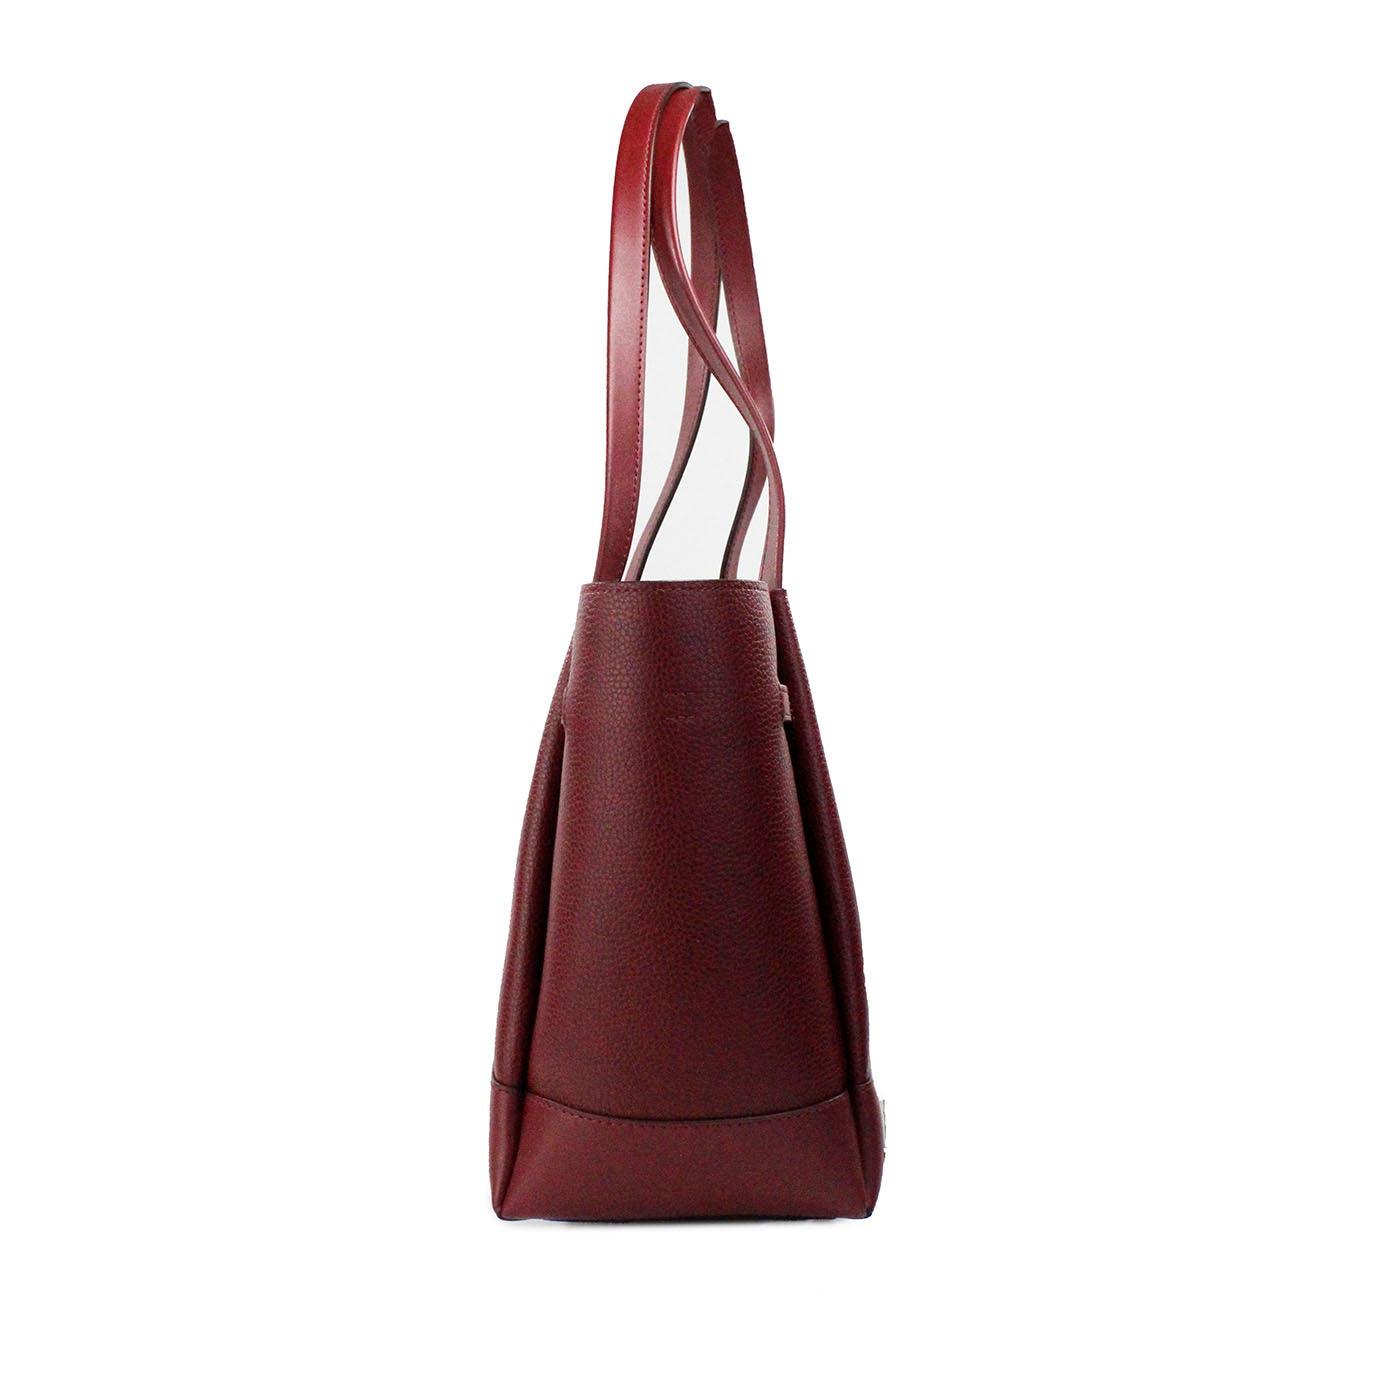 Michael Kors Reed Large Dark Cherry Leather Belted Tote Shoulder Bag Purse - PER.FASHION